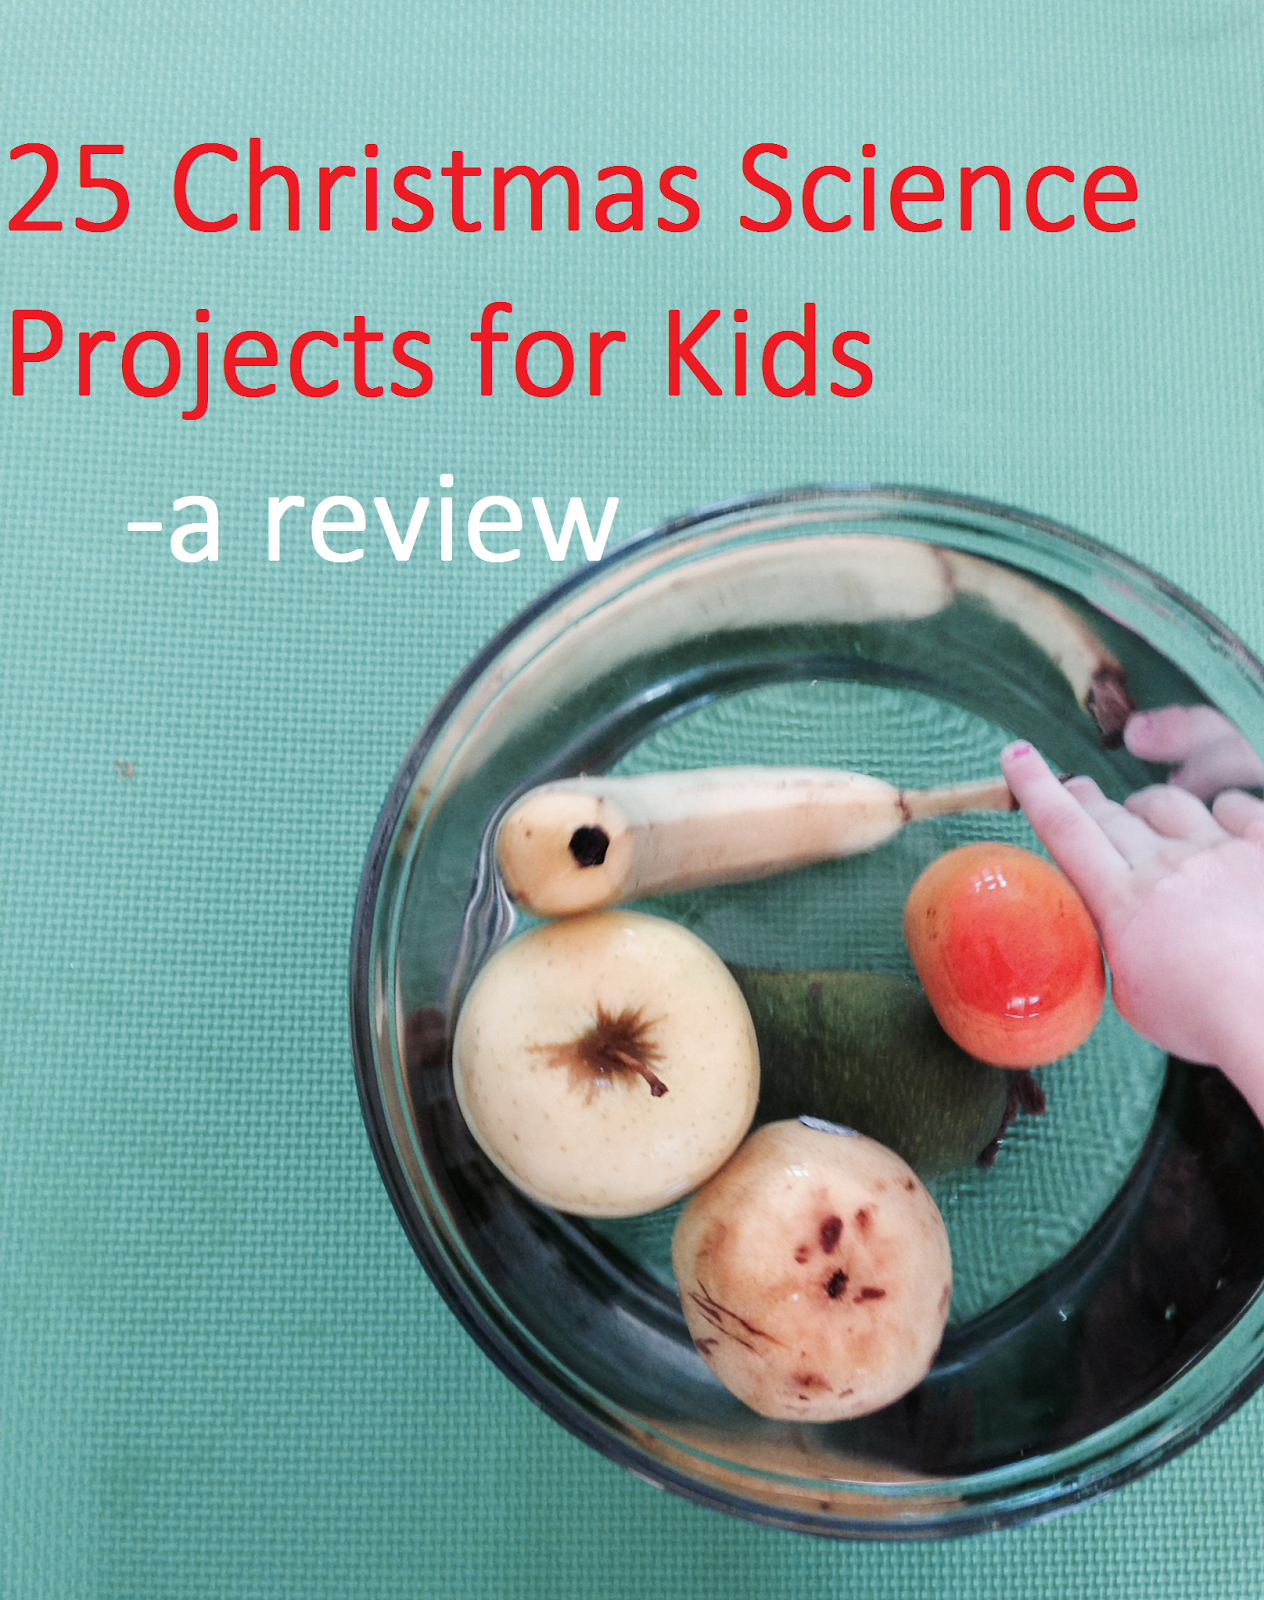 Link to 25 Christmas science projects for kids- a review